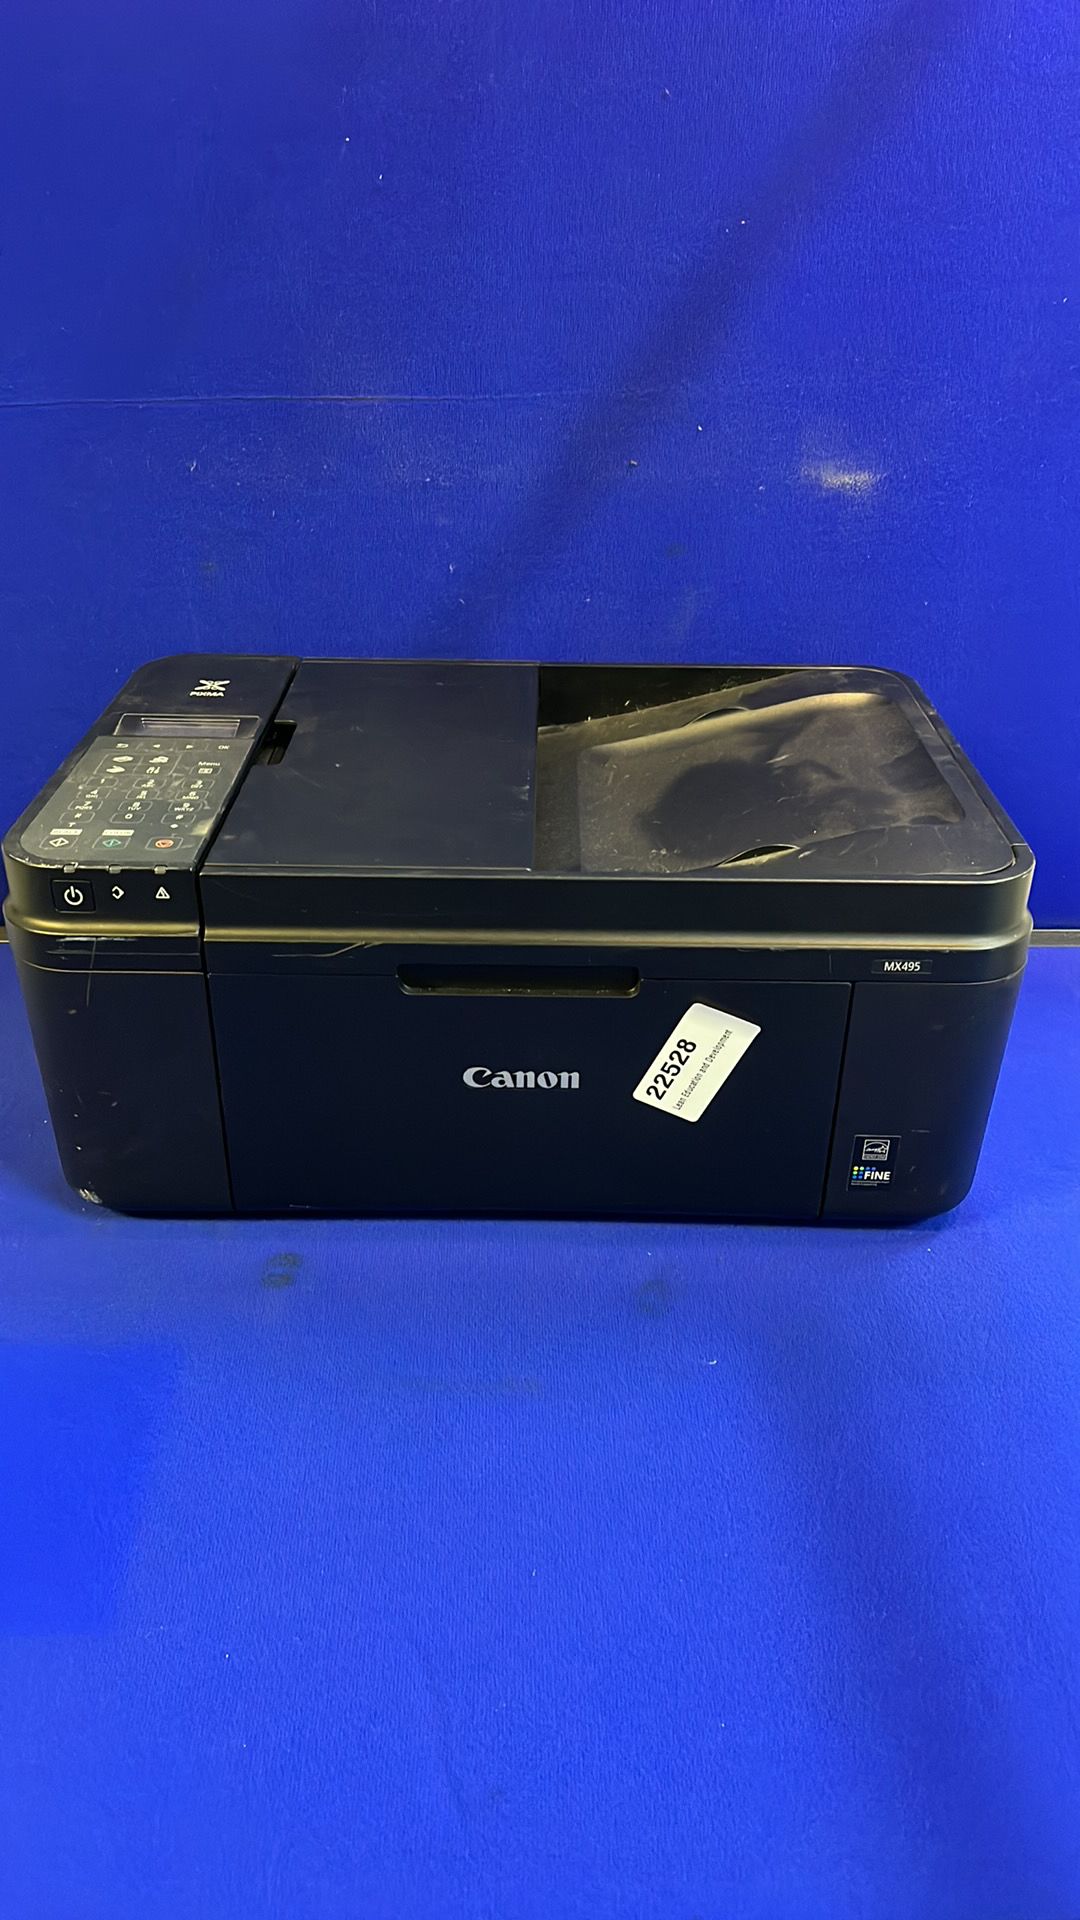 Cannon MX495 All In One Printer